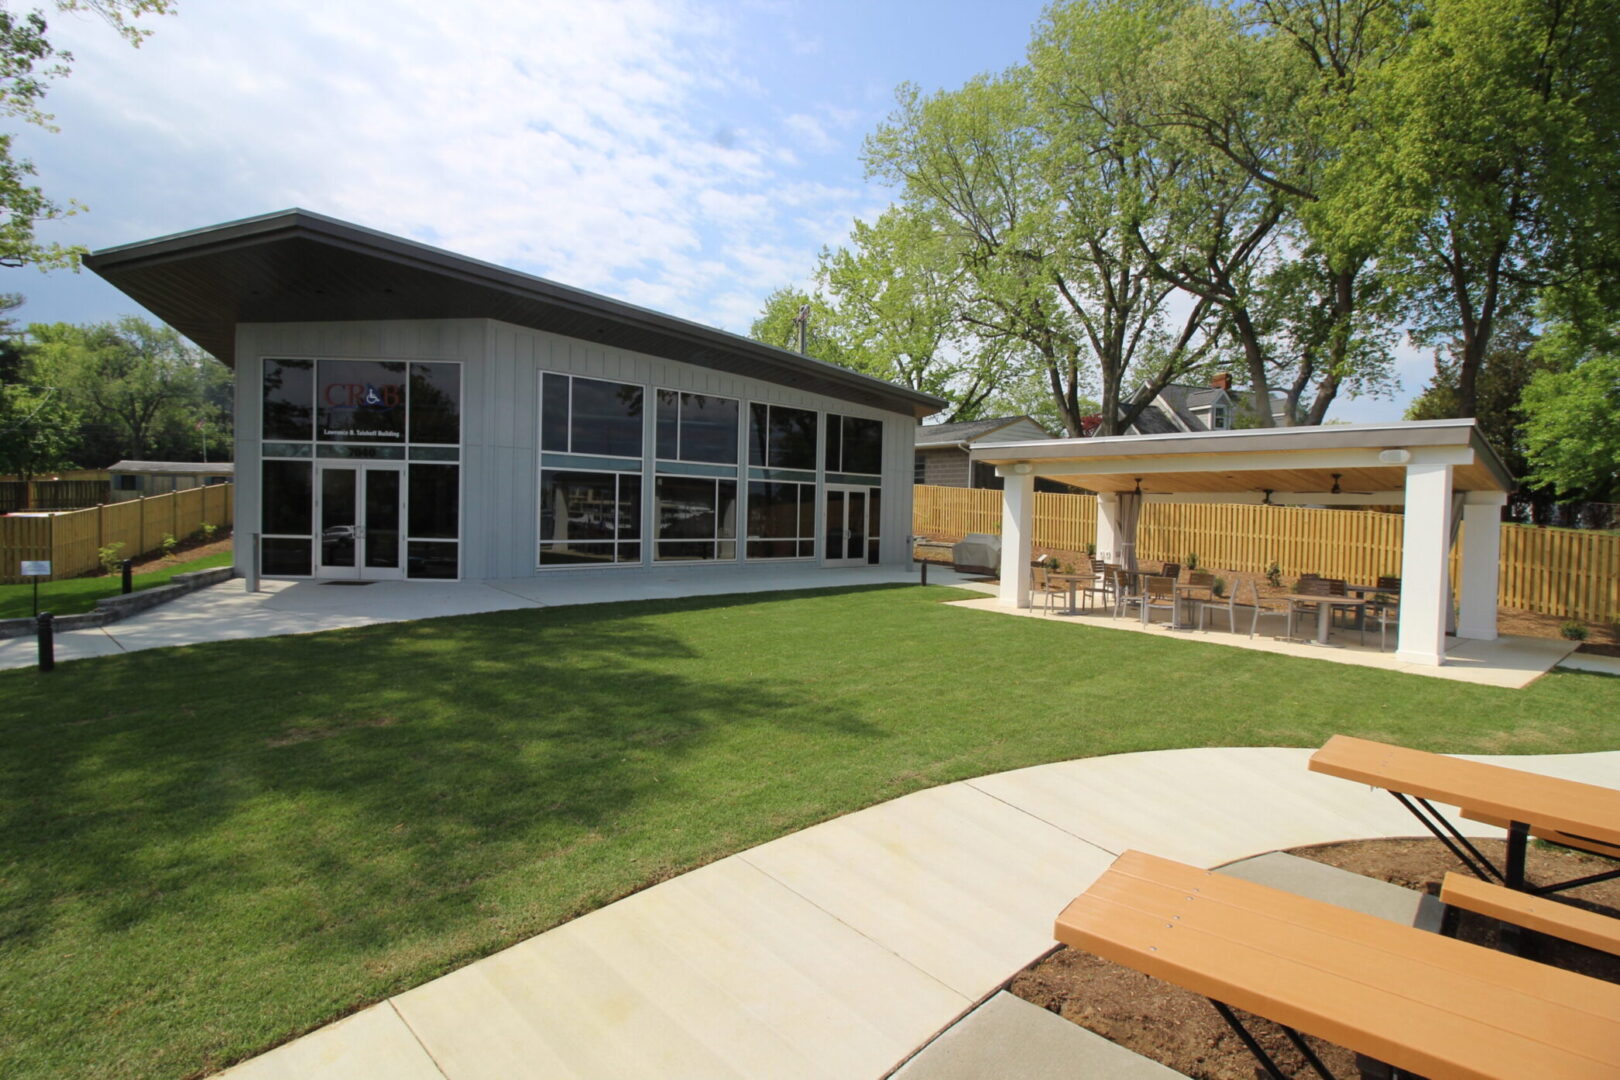 Lawrence B. Taishoff Building, lawn and pavilion at the Adaptive Boating Center